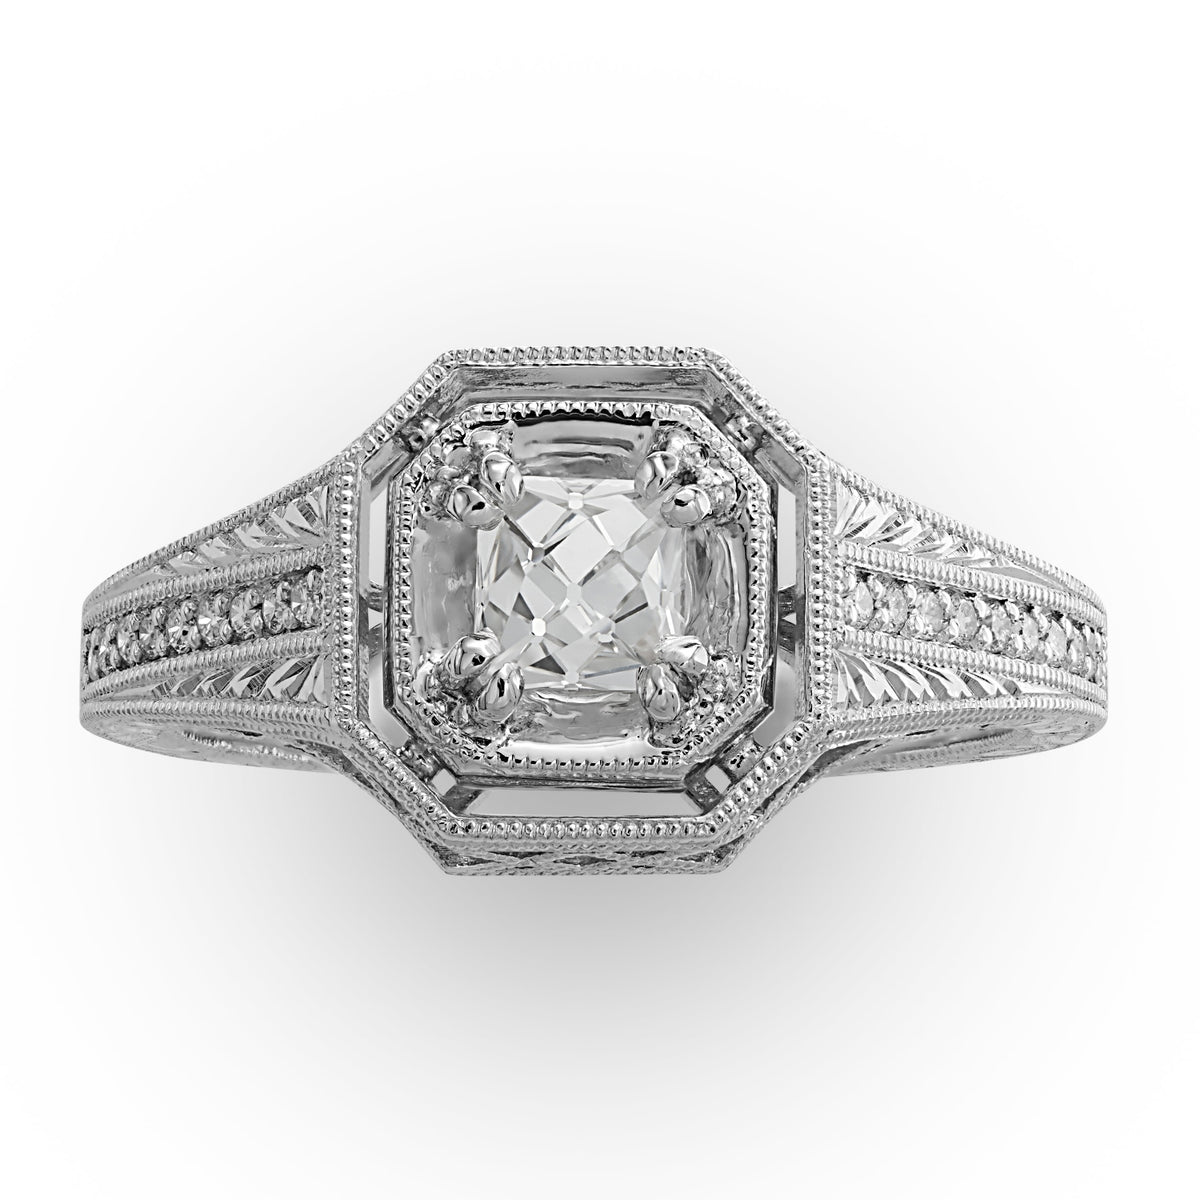 French Cut Diamond in Engraved Ring